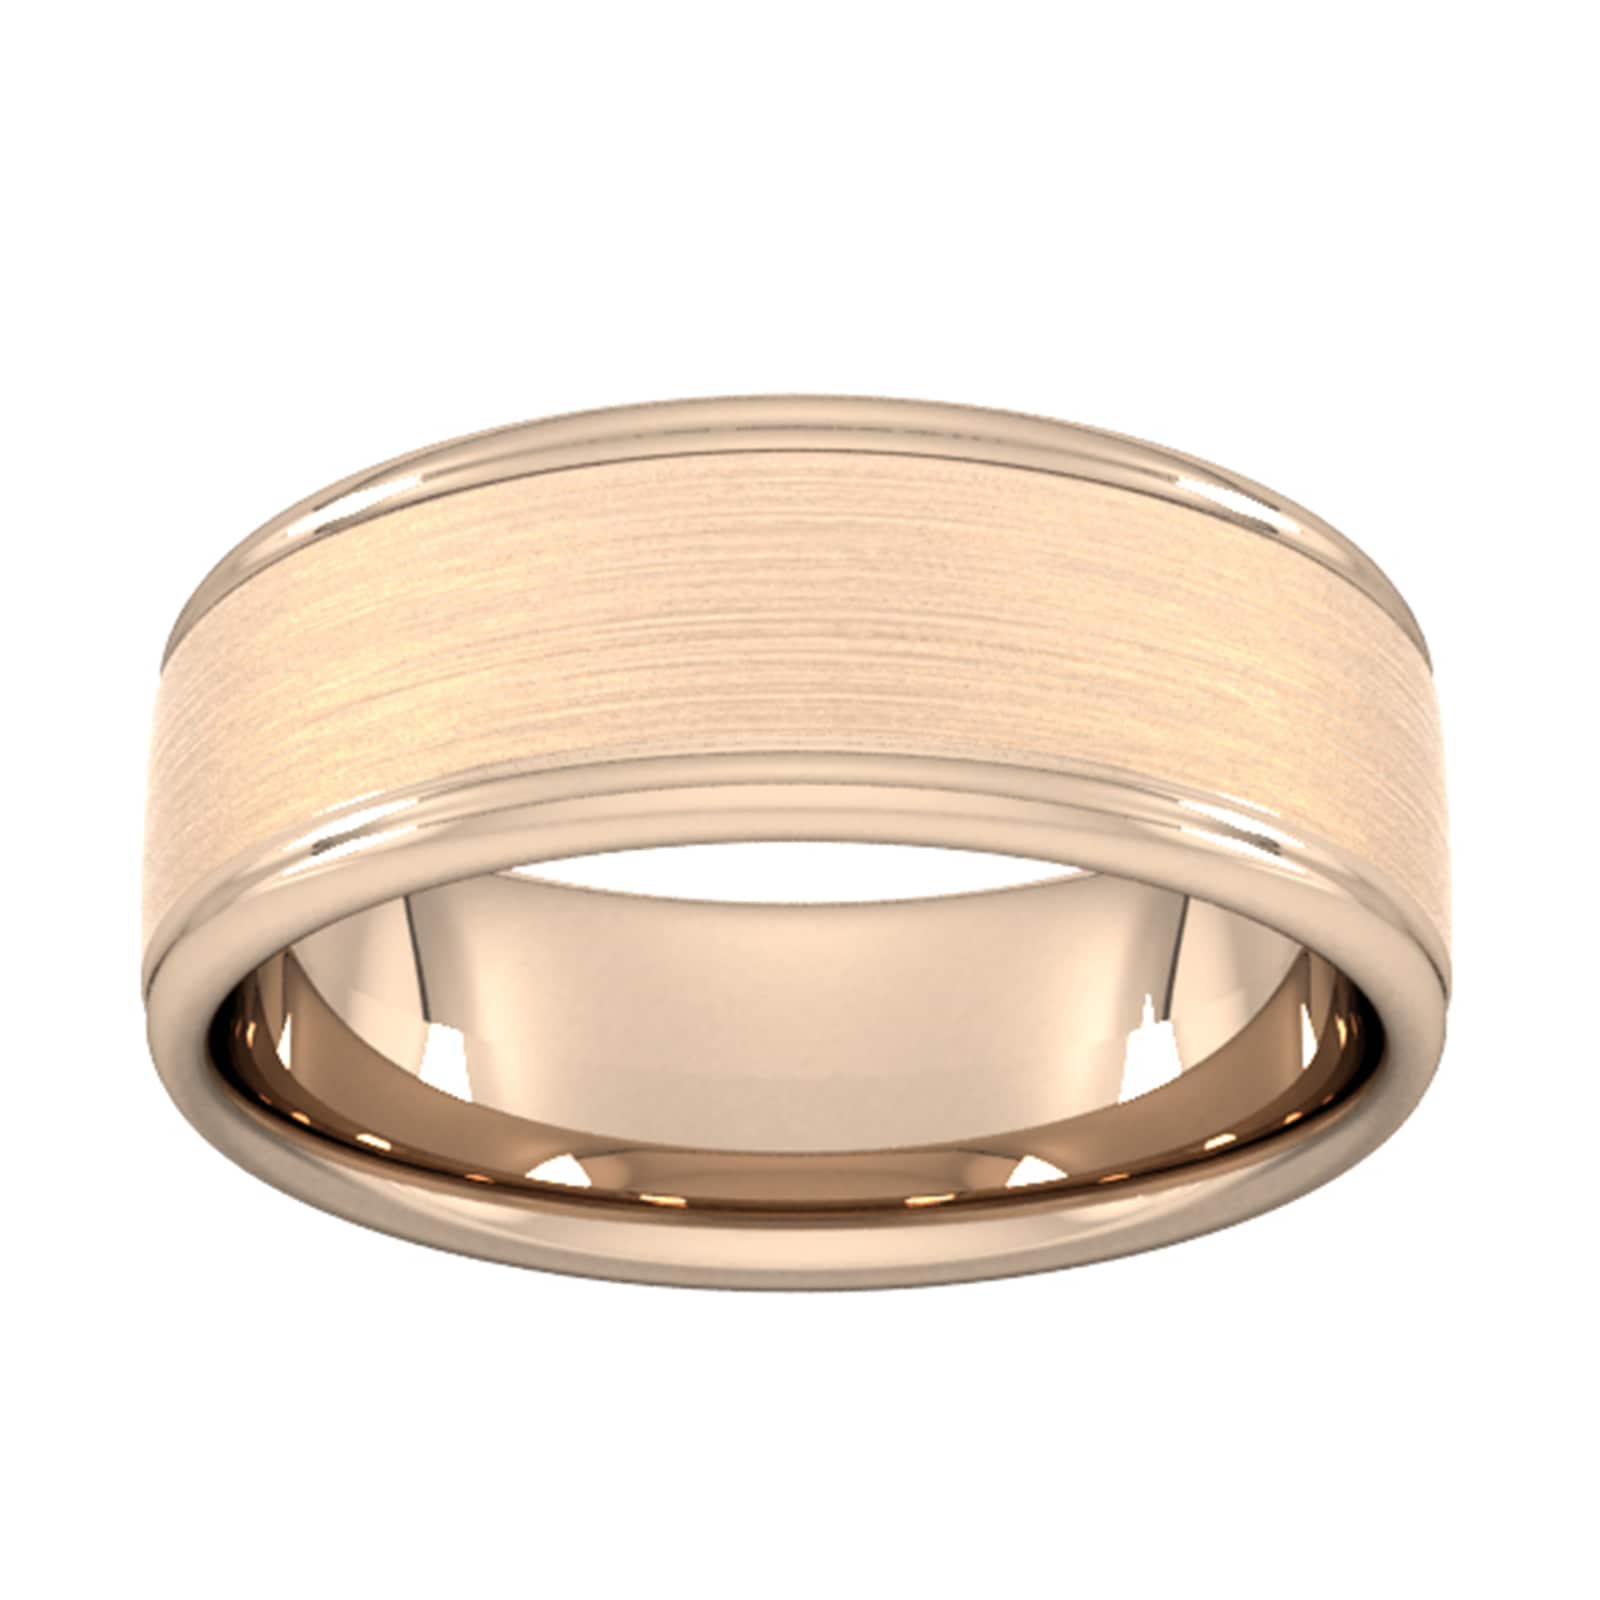 8mm Slight Court Heavy Matt Centre With Grooves Wedding Ring In 9 Carat Rose Gold - Ring Size Y